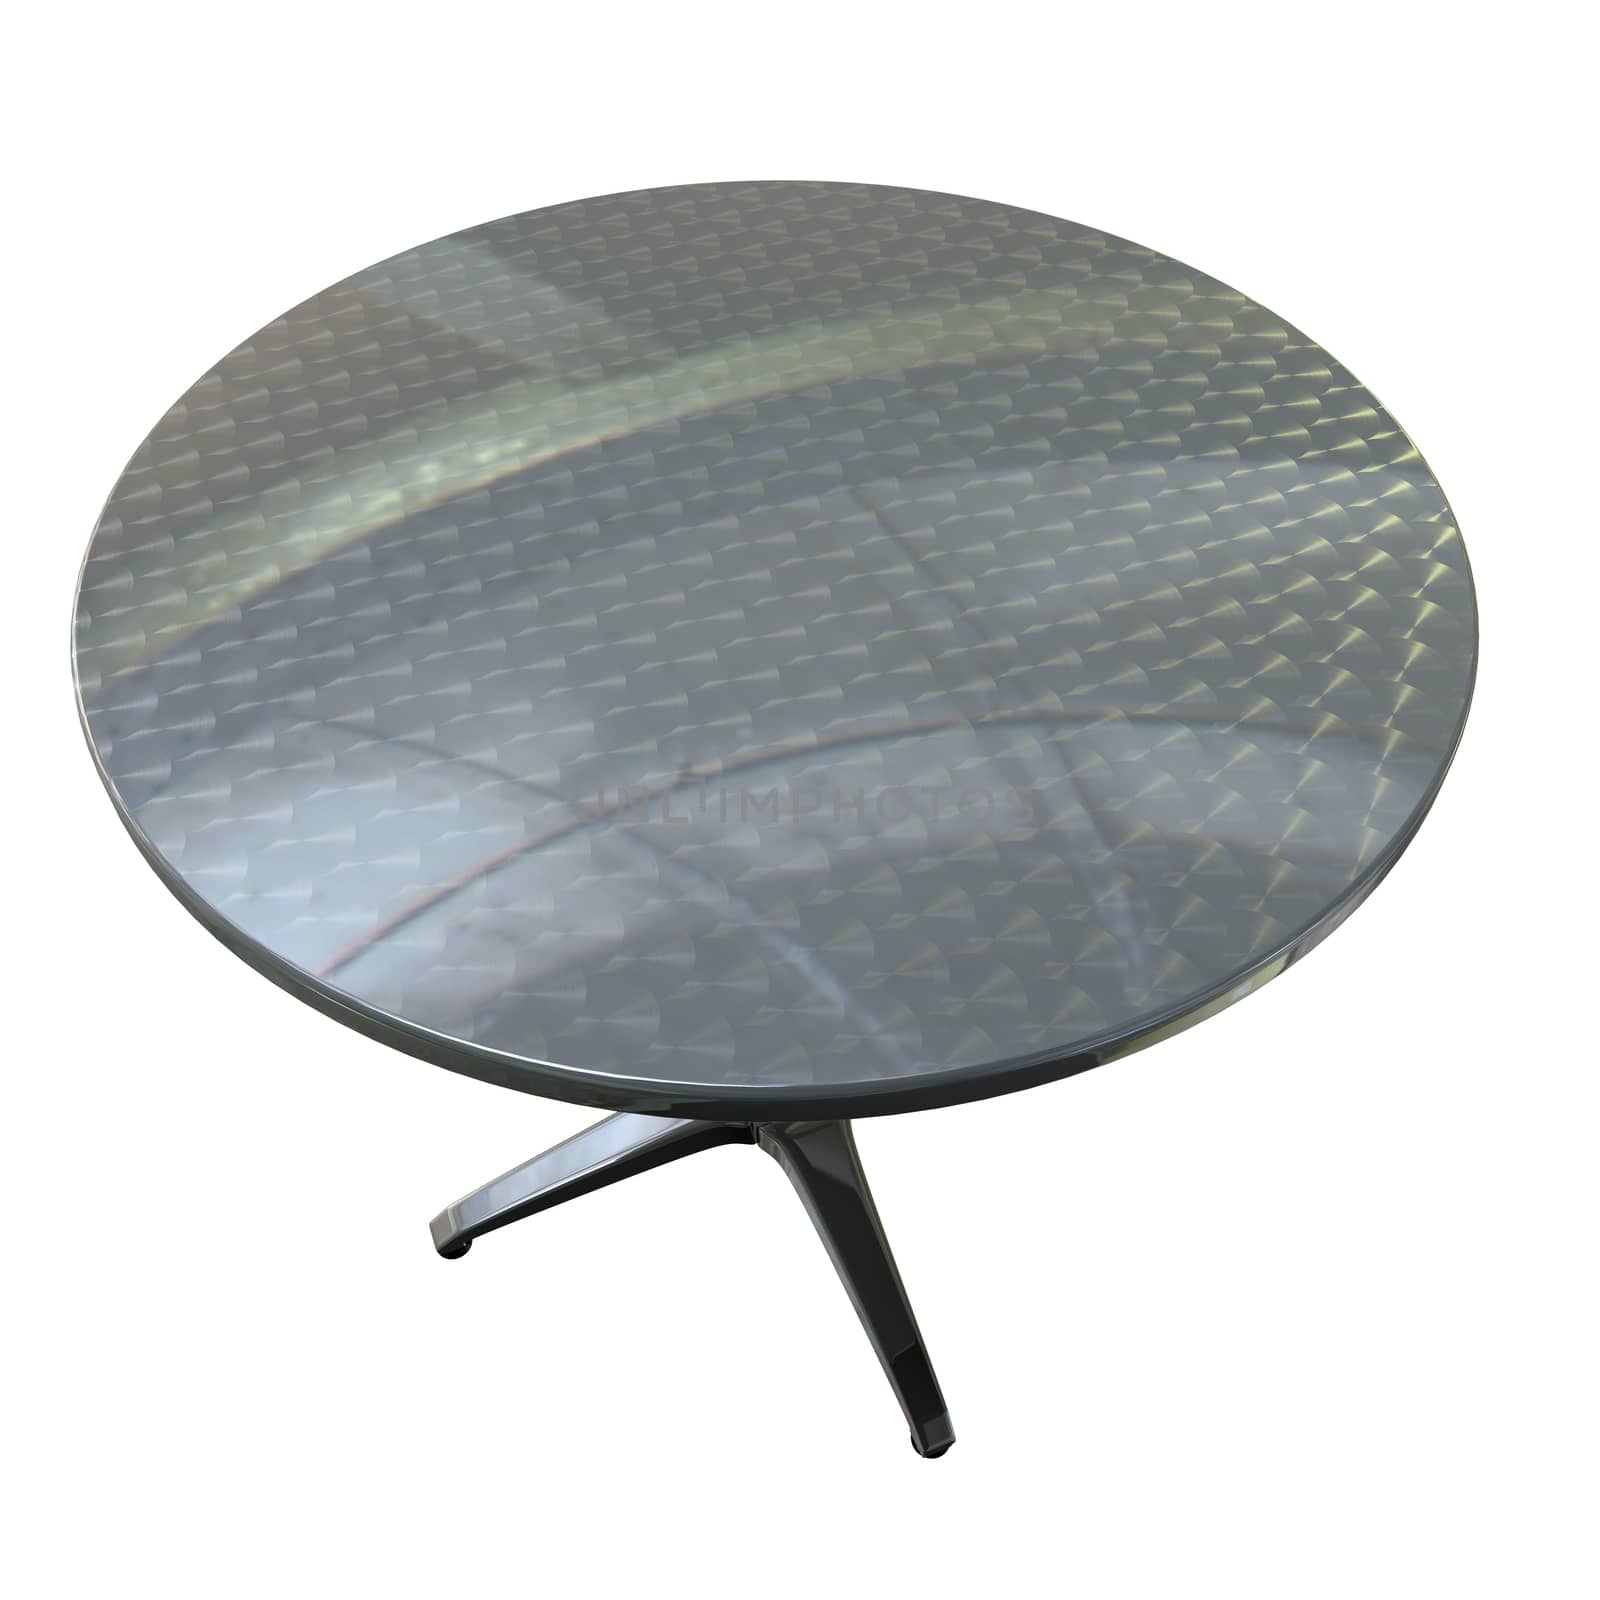 top of planar chrome round table by stockbp